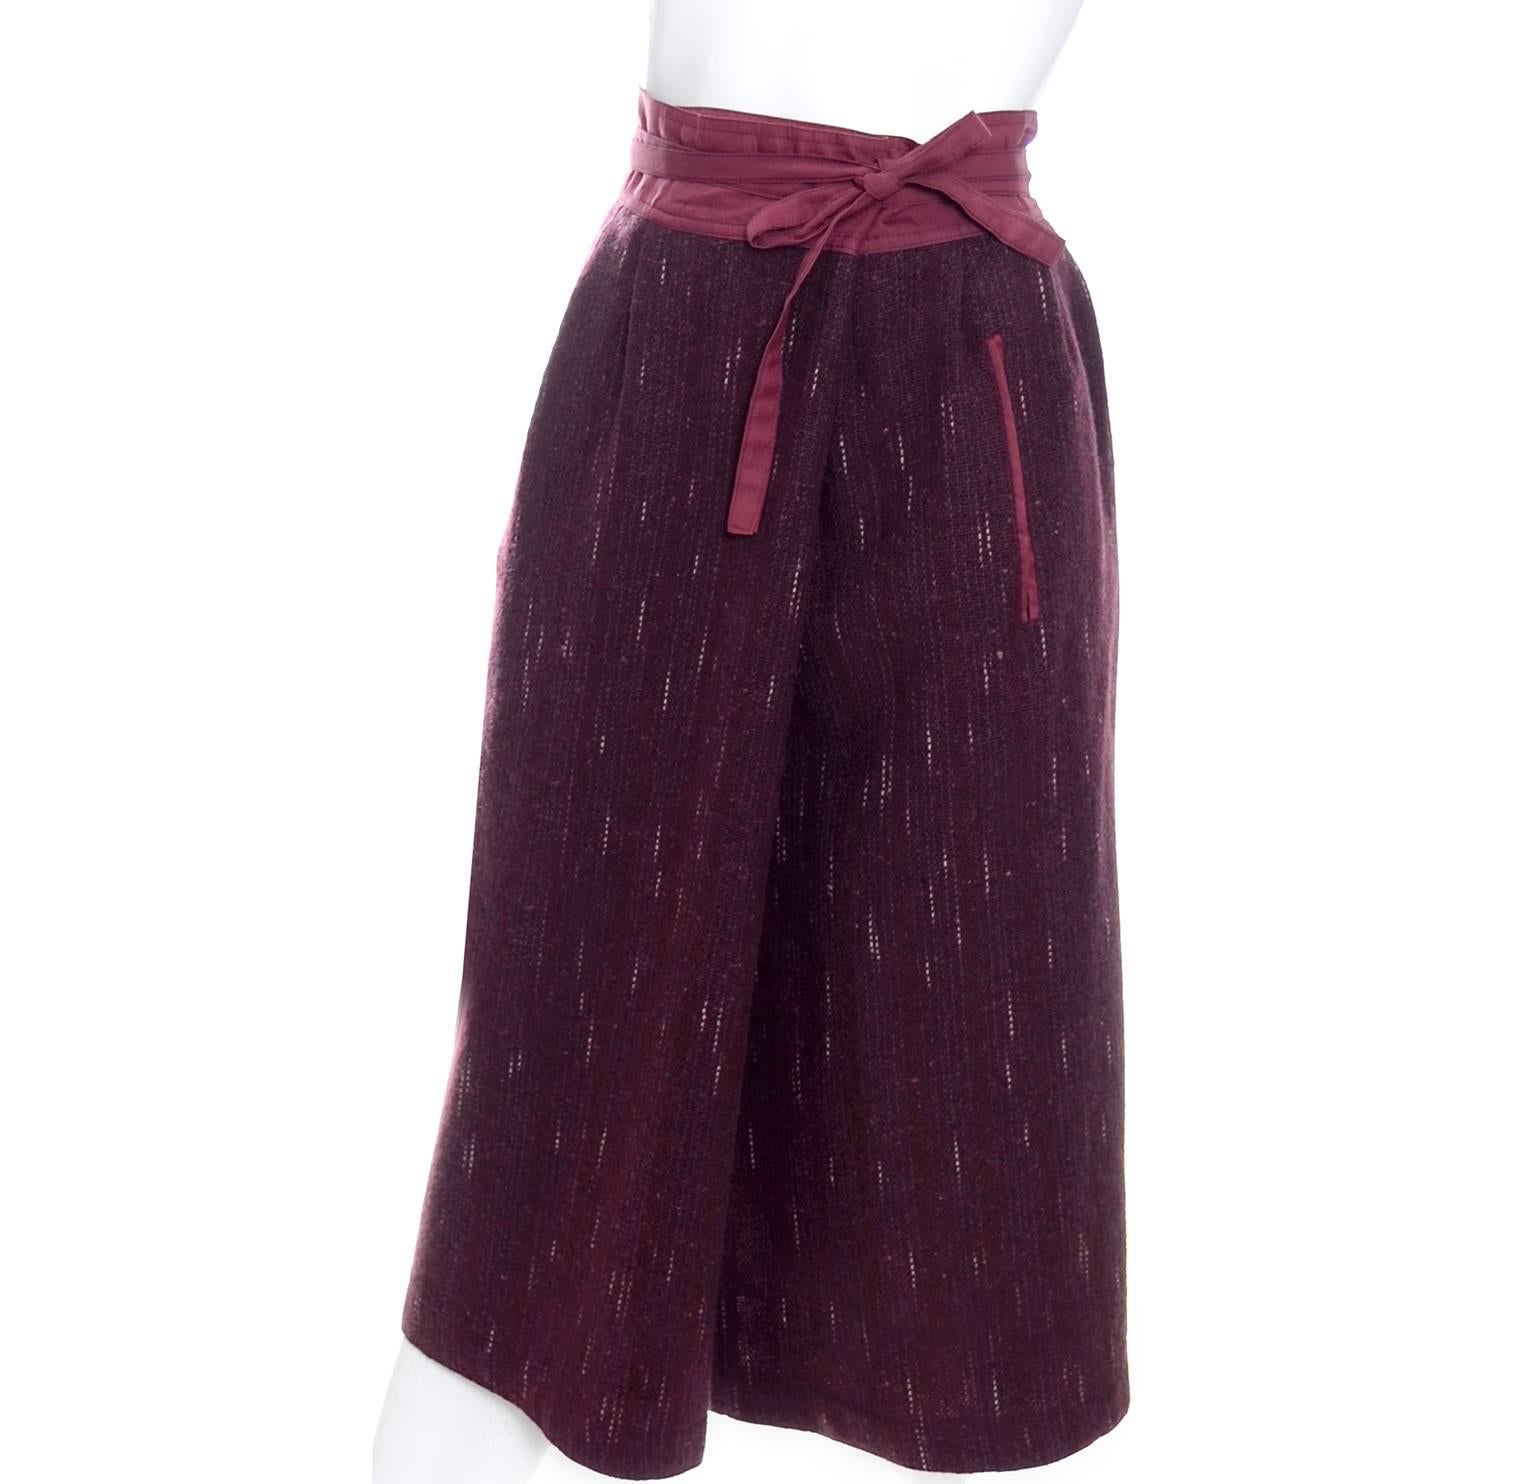 This is a fantastic vintage skirt from Kenzo.  This vintage burgundy red tweed wool skirt is lined and has an unusual fold over wrap style design that closes with a tie at the waist.  Though not a classic 